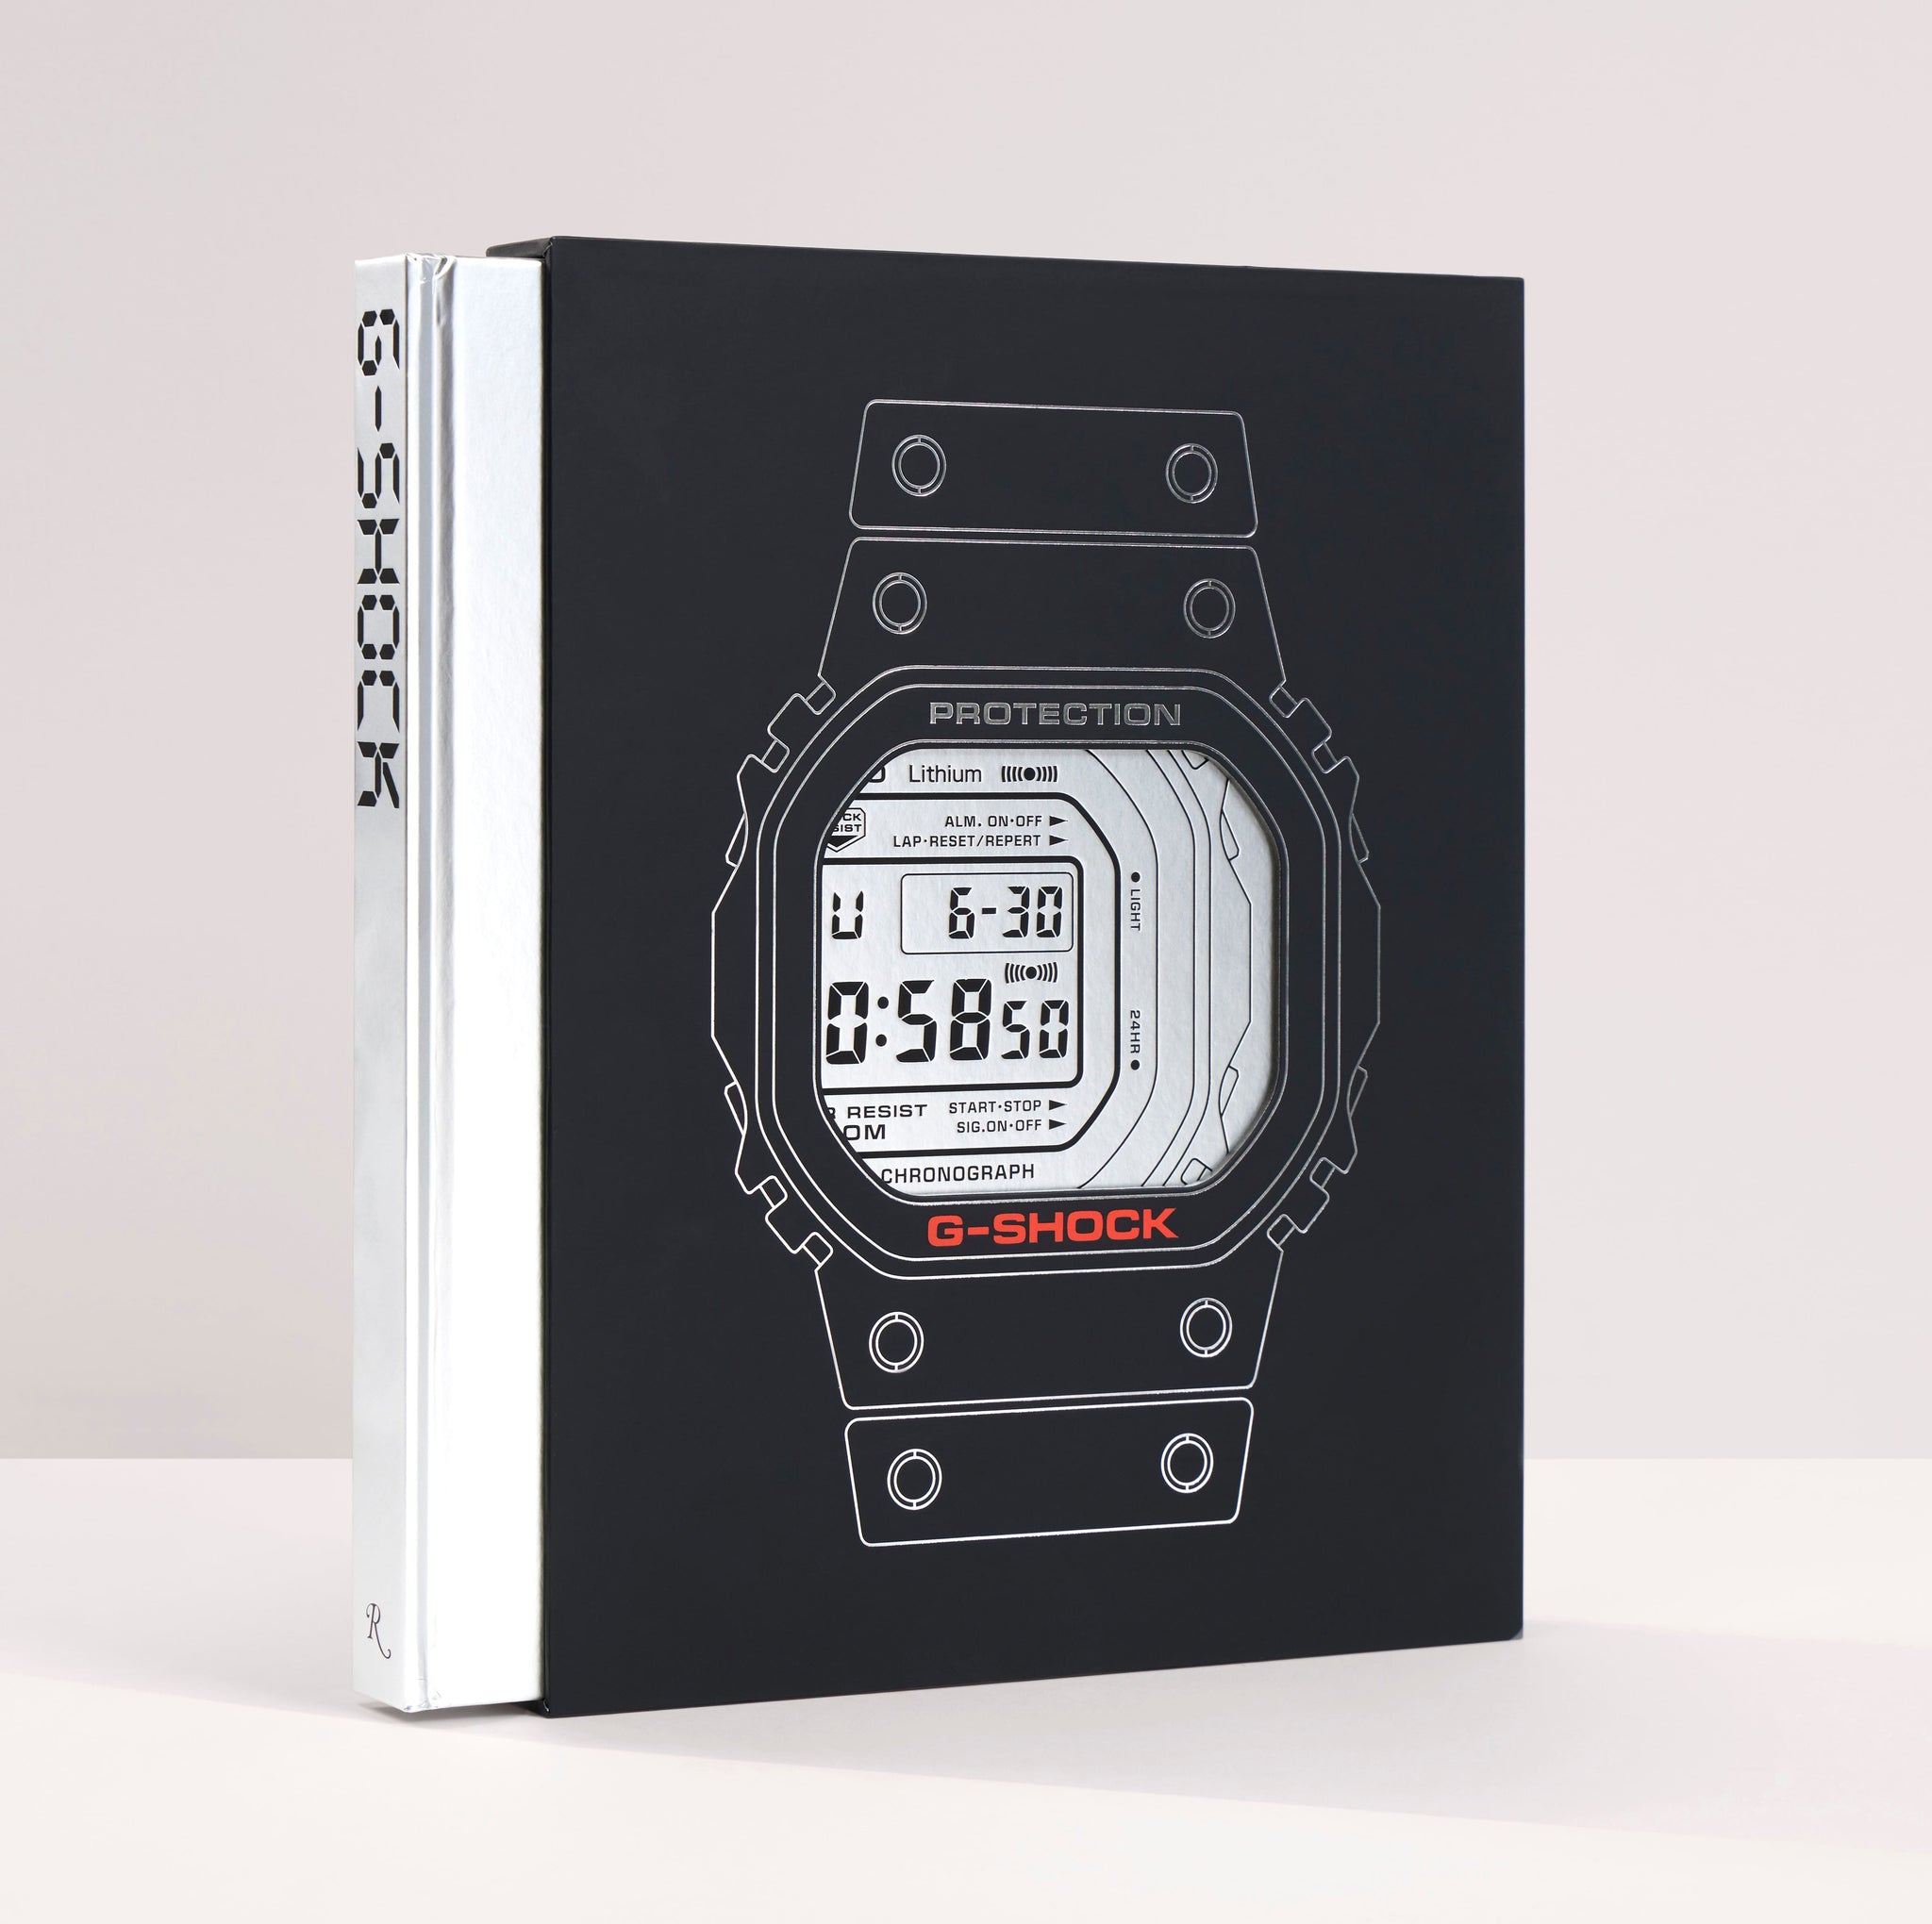 Introducing the new G-SHOCK 40th Anniversary Model: Recrystallized